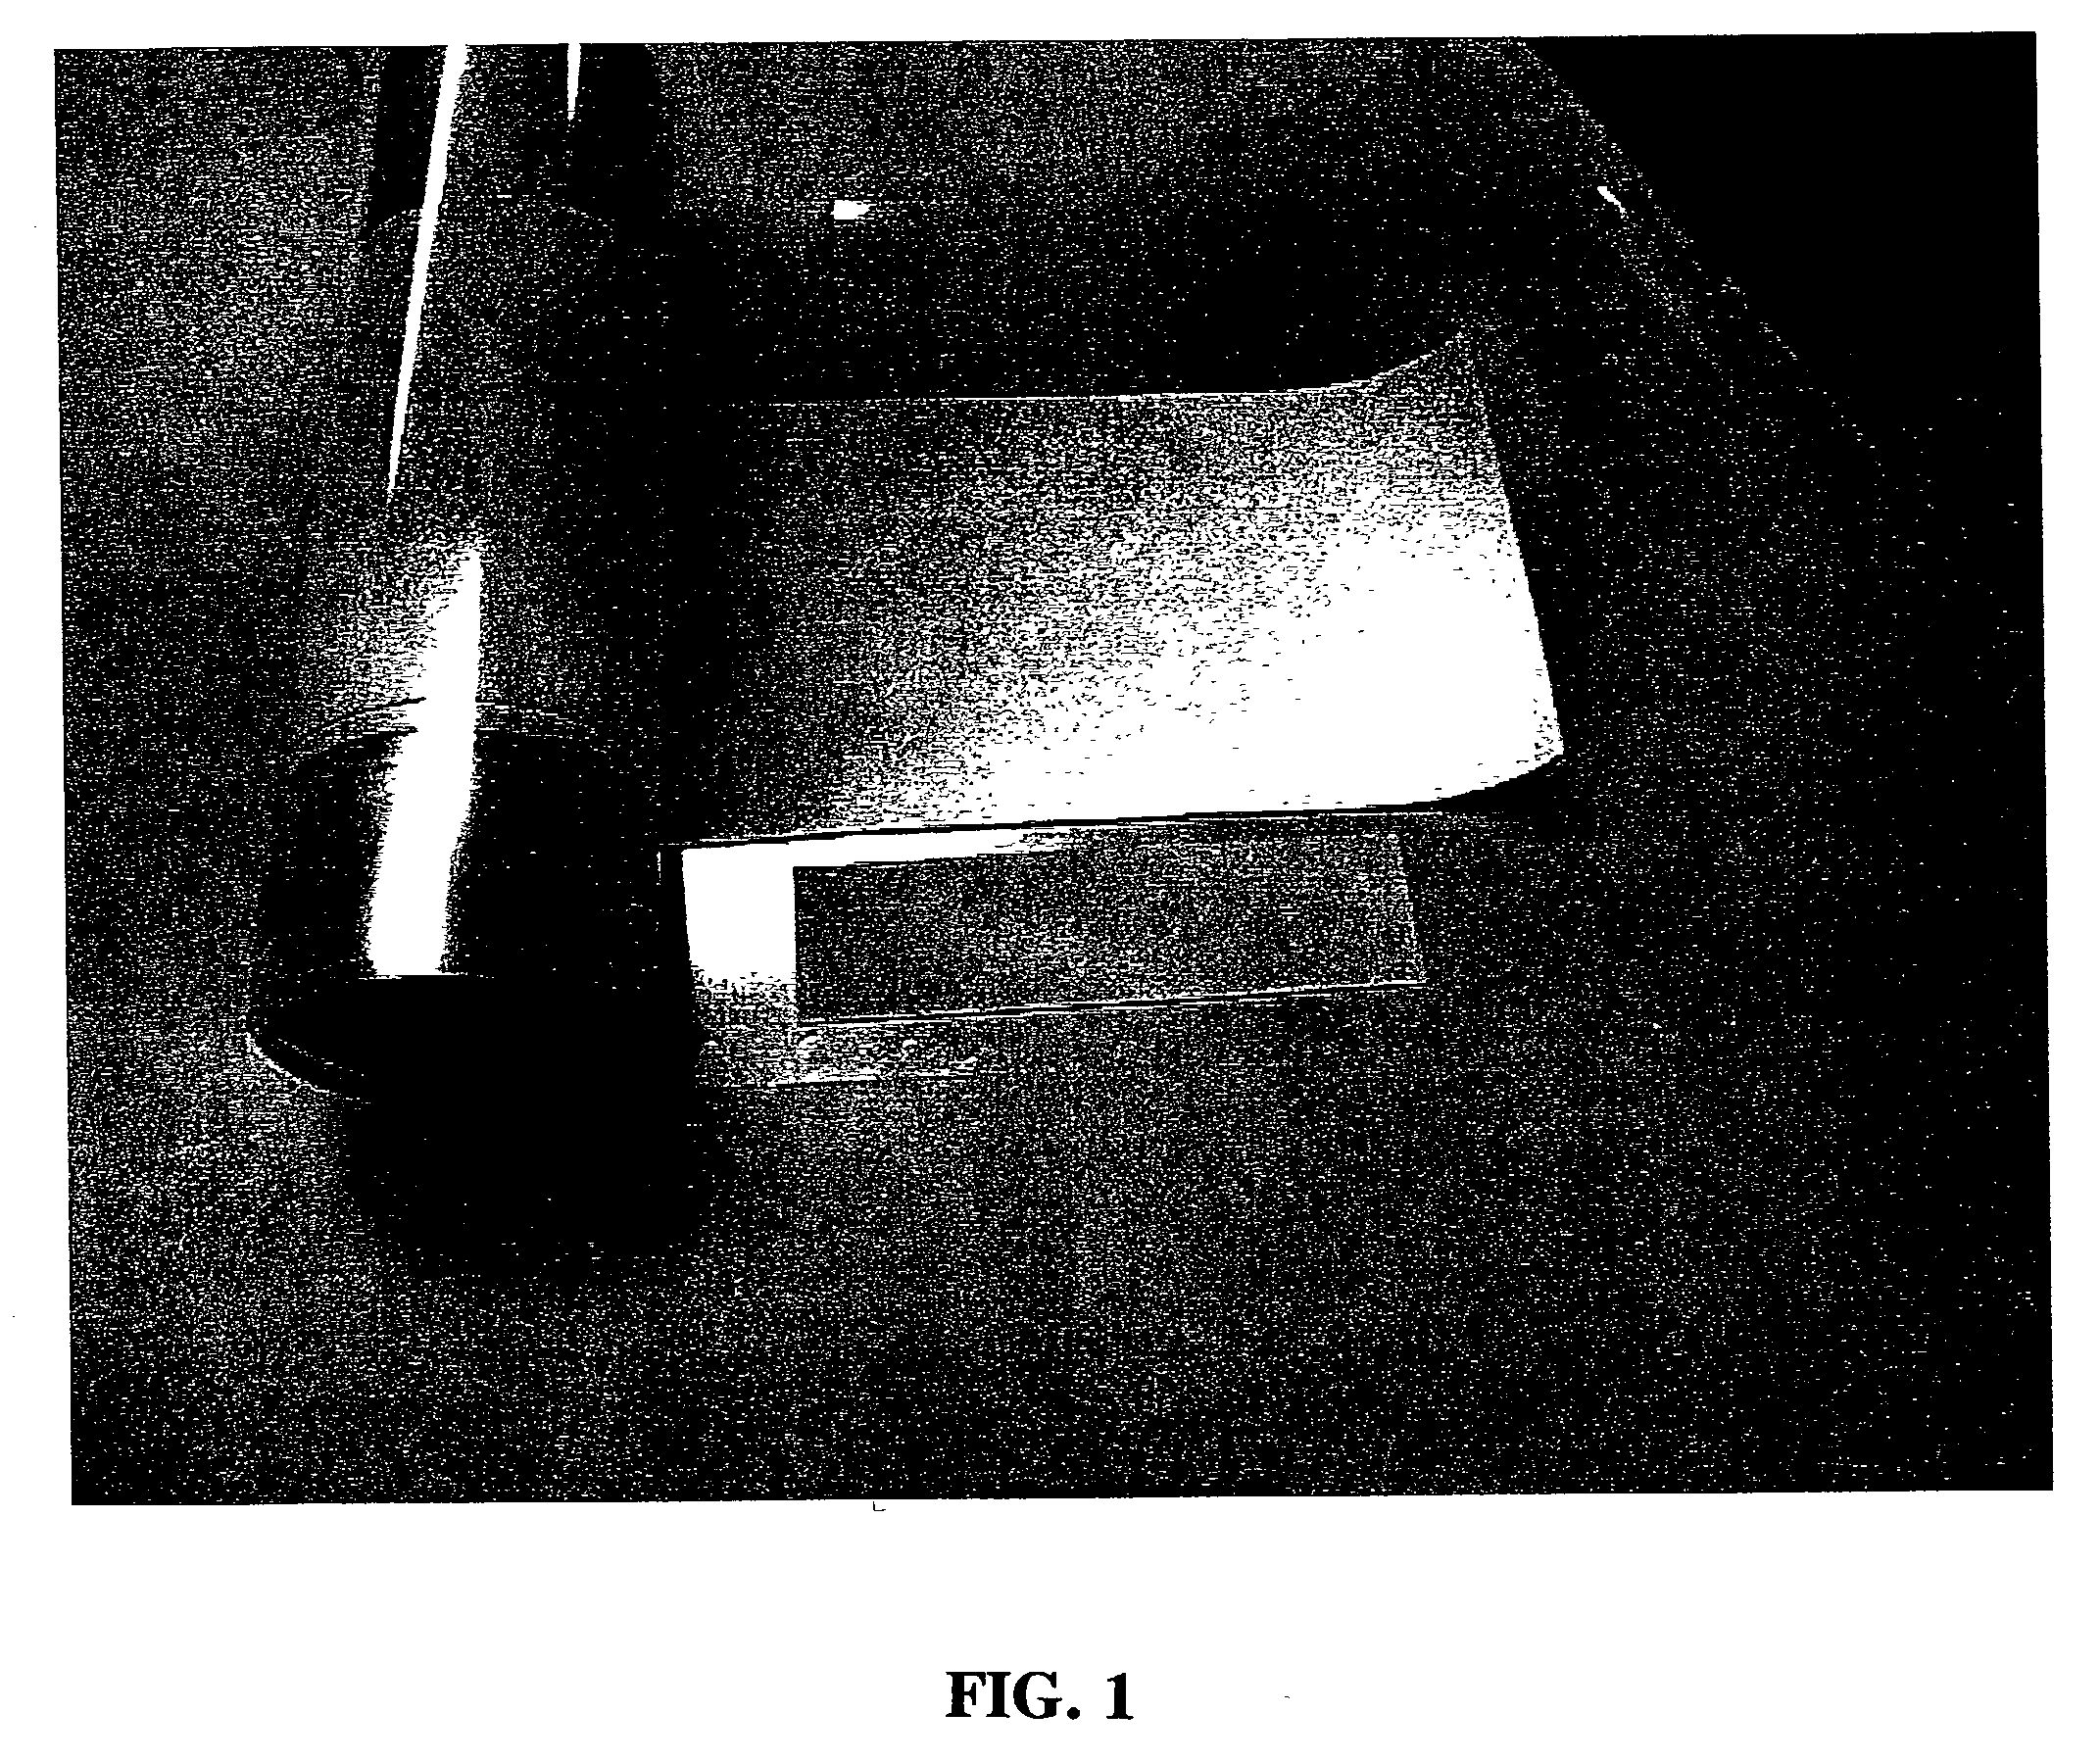 Method for producing low-loss tunable ceramic composites with improved breakdown strengths